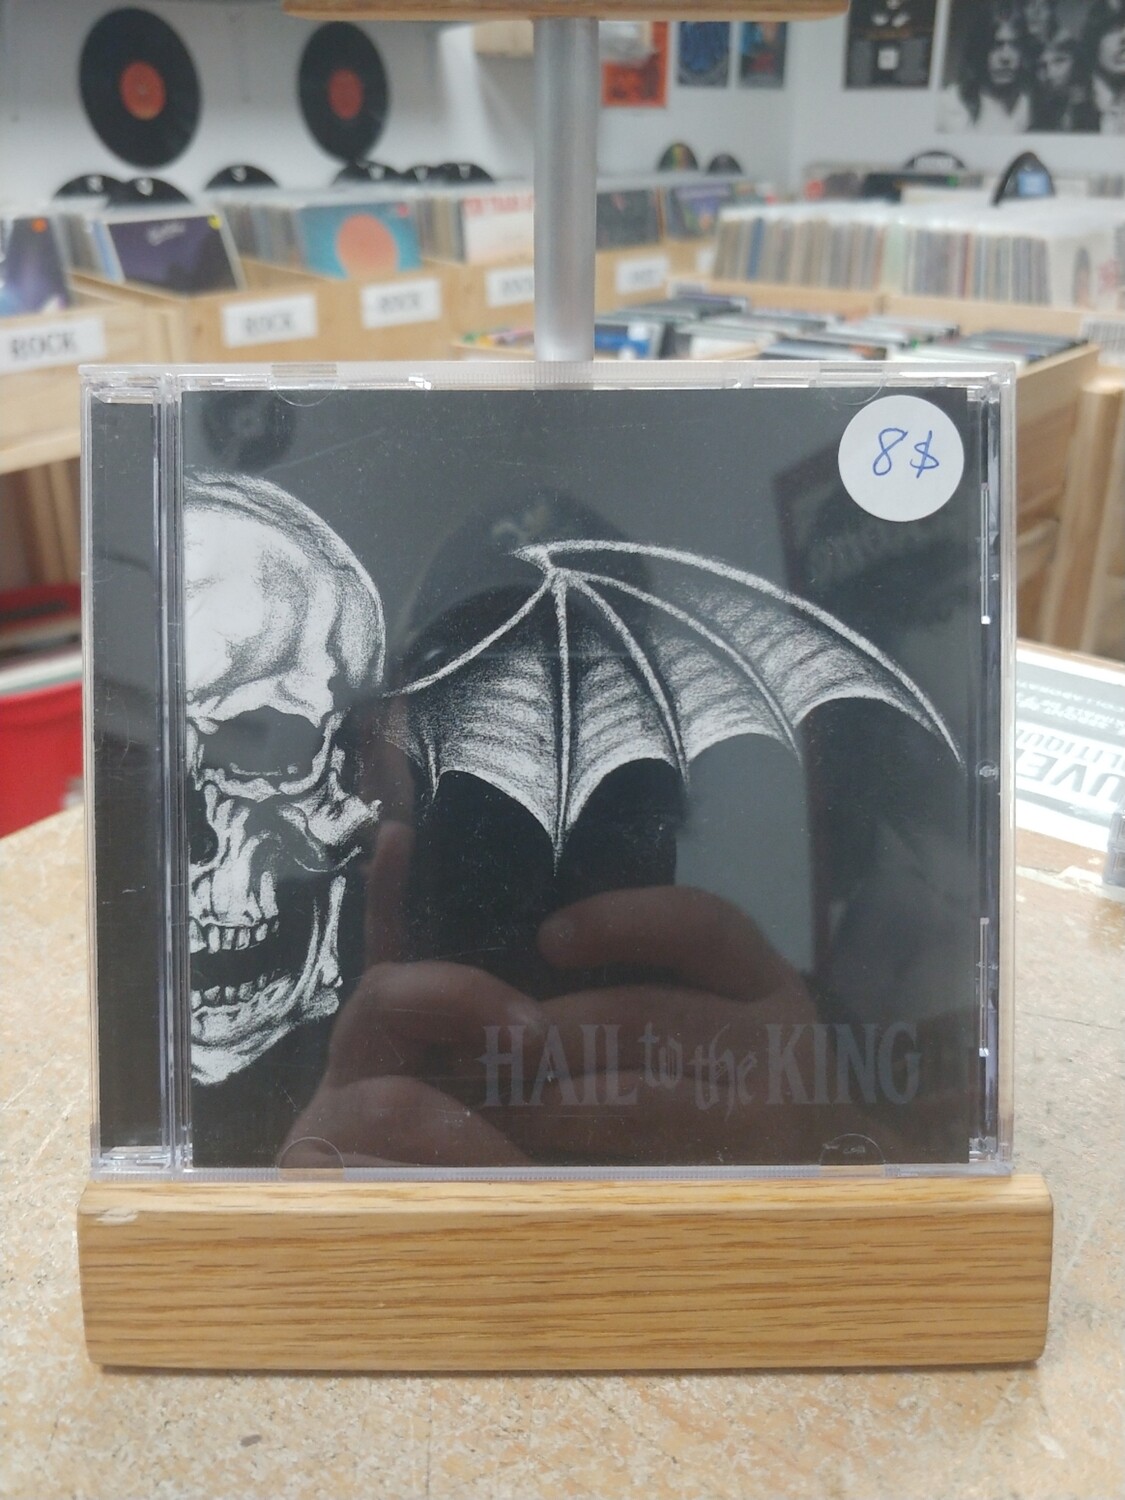 Avenged Sevenfold - Hail to the King (CD)